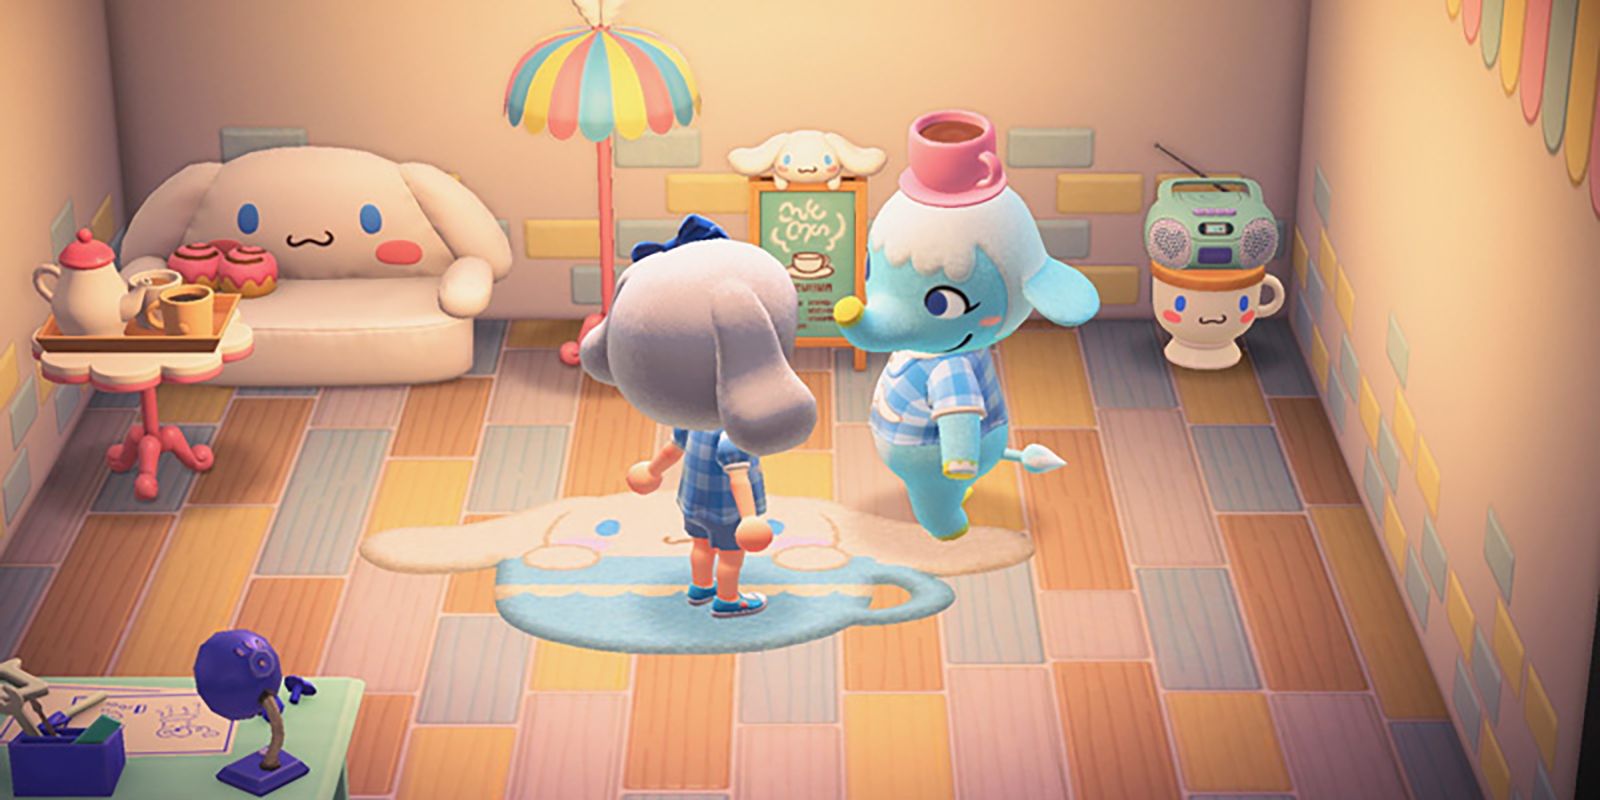 Animal Crossing's Sanrio Amiibo Cards Instantly Sell Out At Target